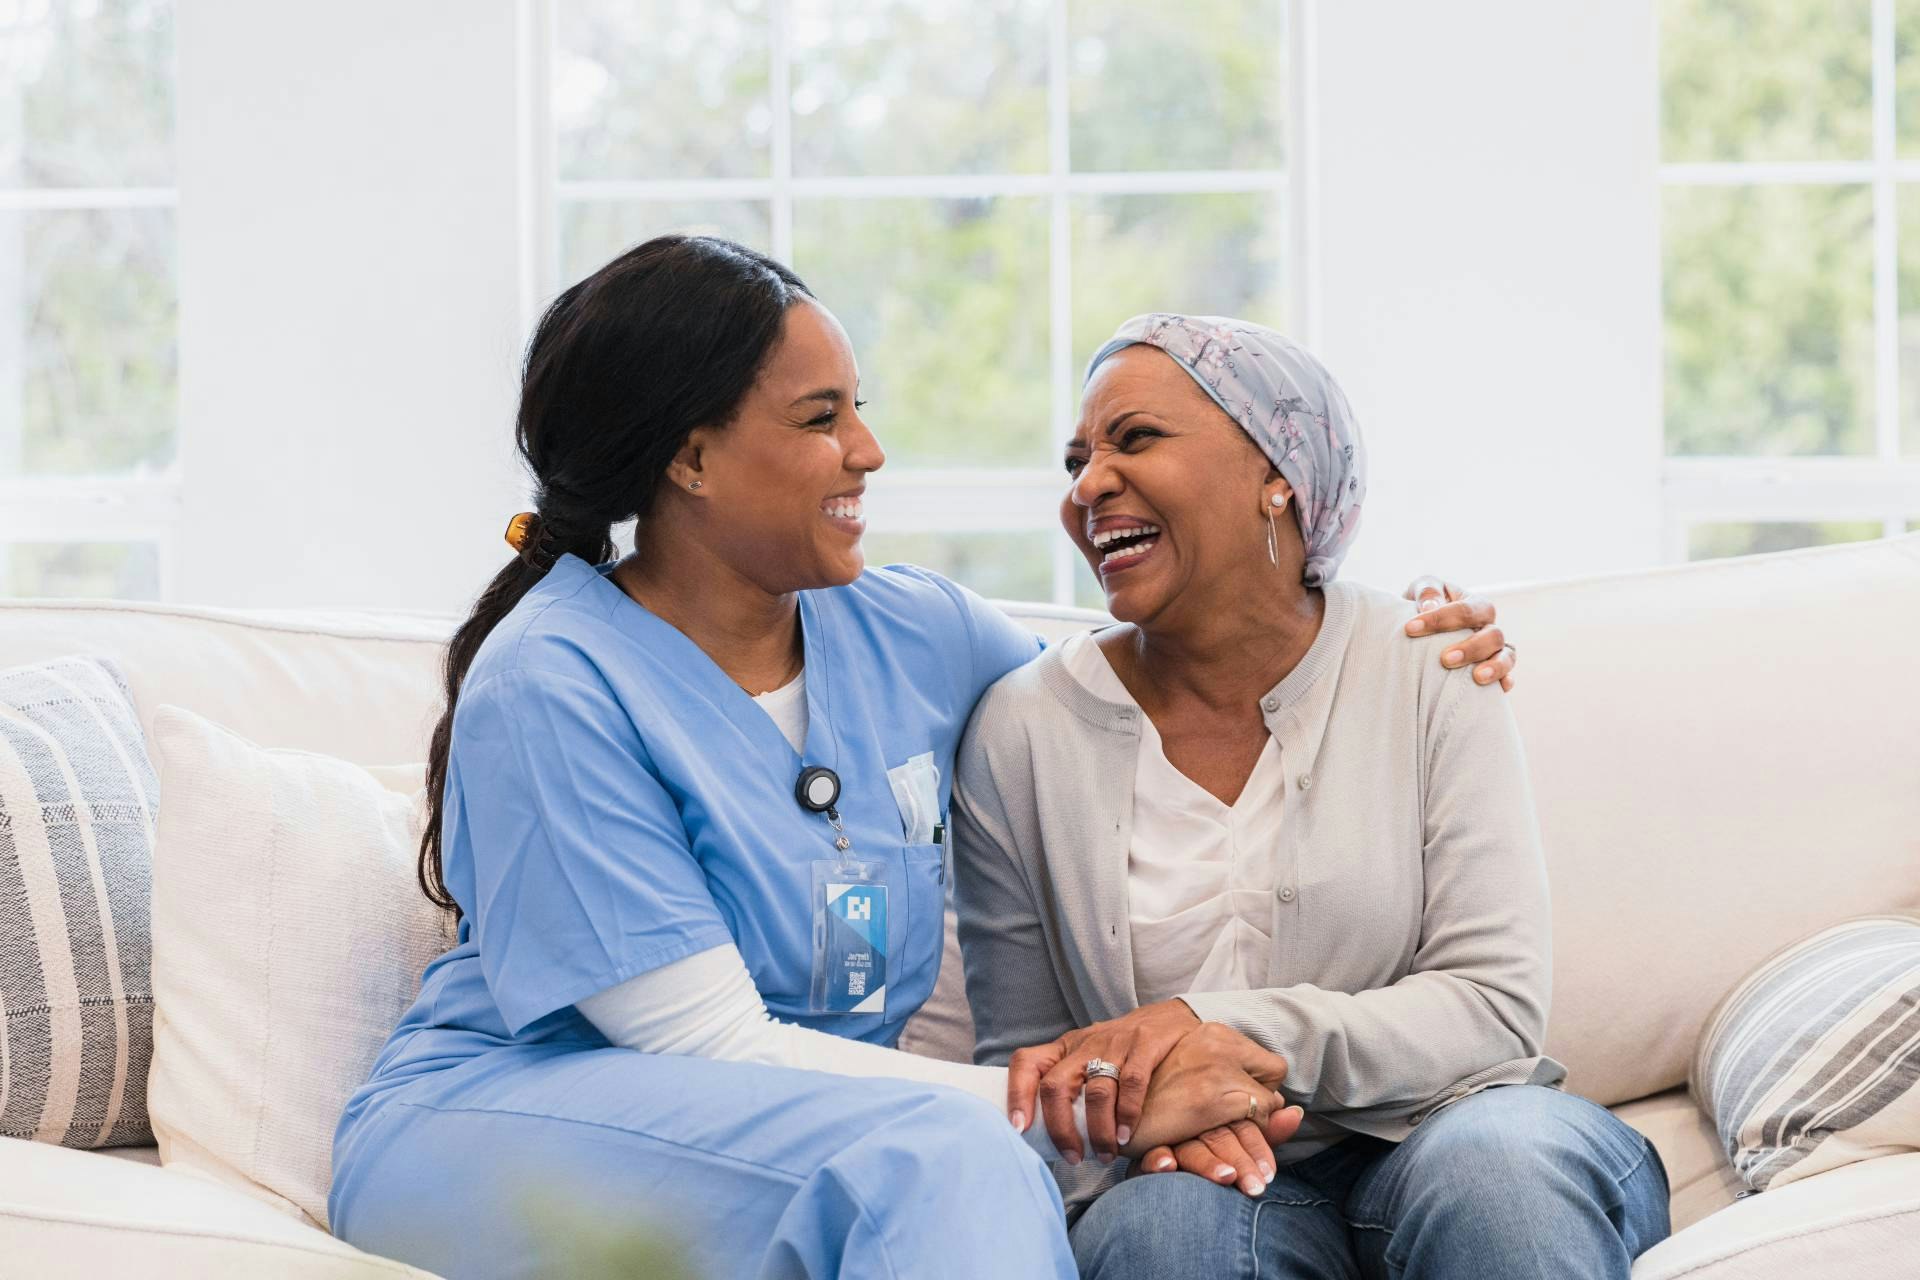 A nurse and a patient sit together on a couch, smiling at each other. The nurse has her arm around the patient